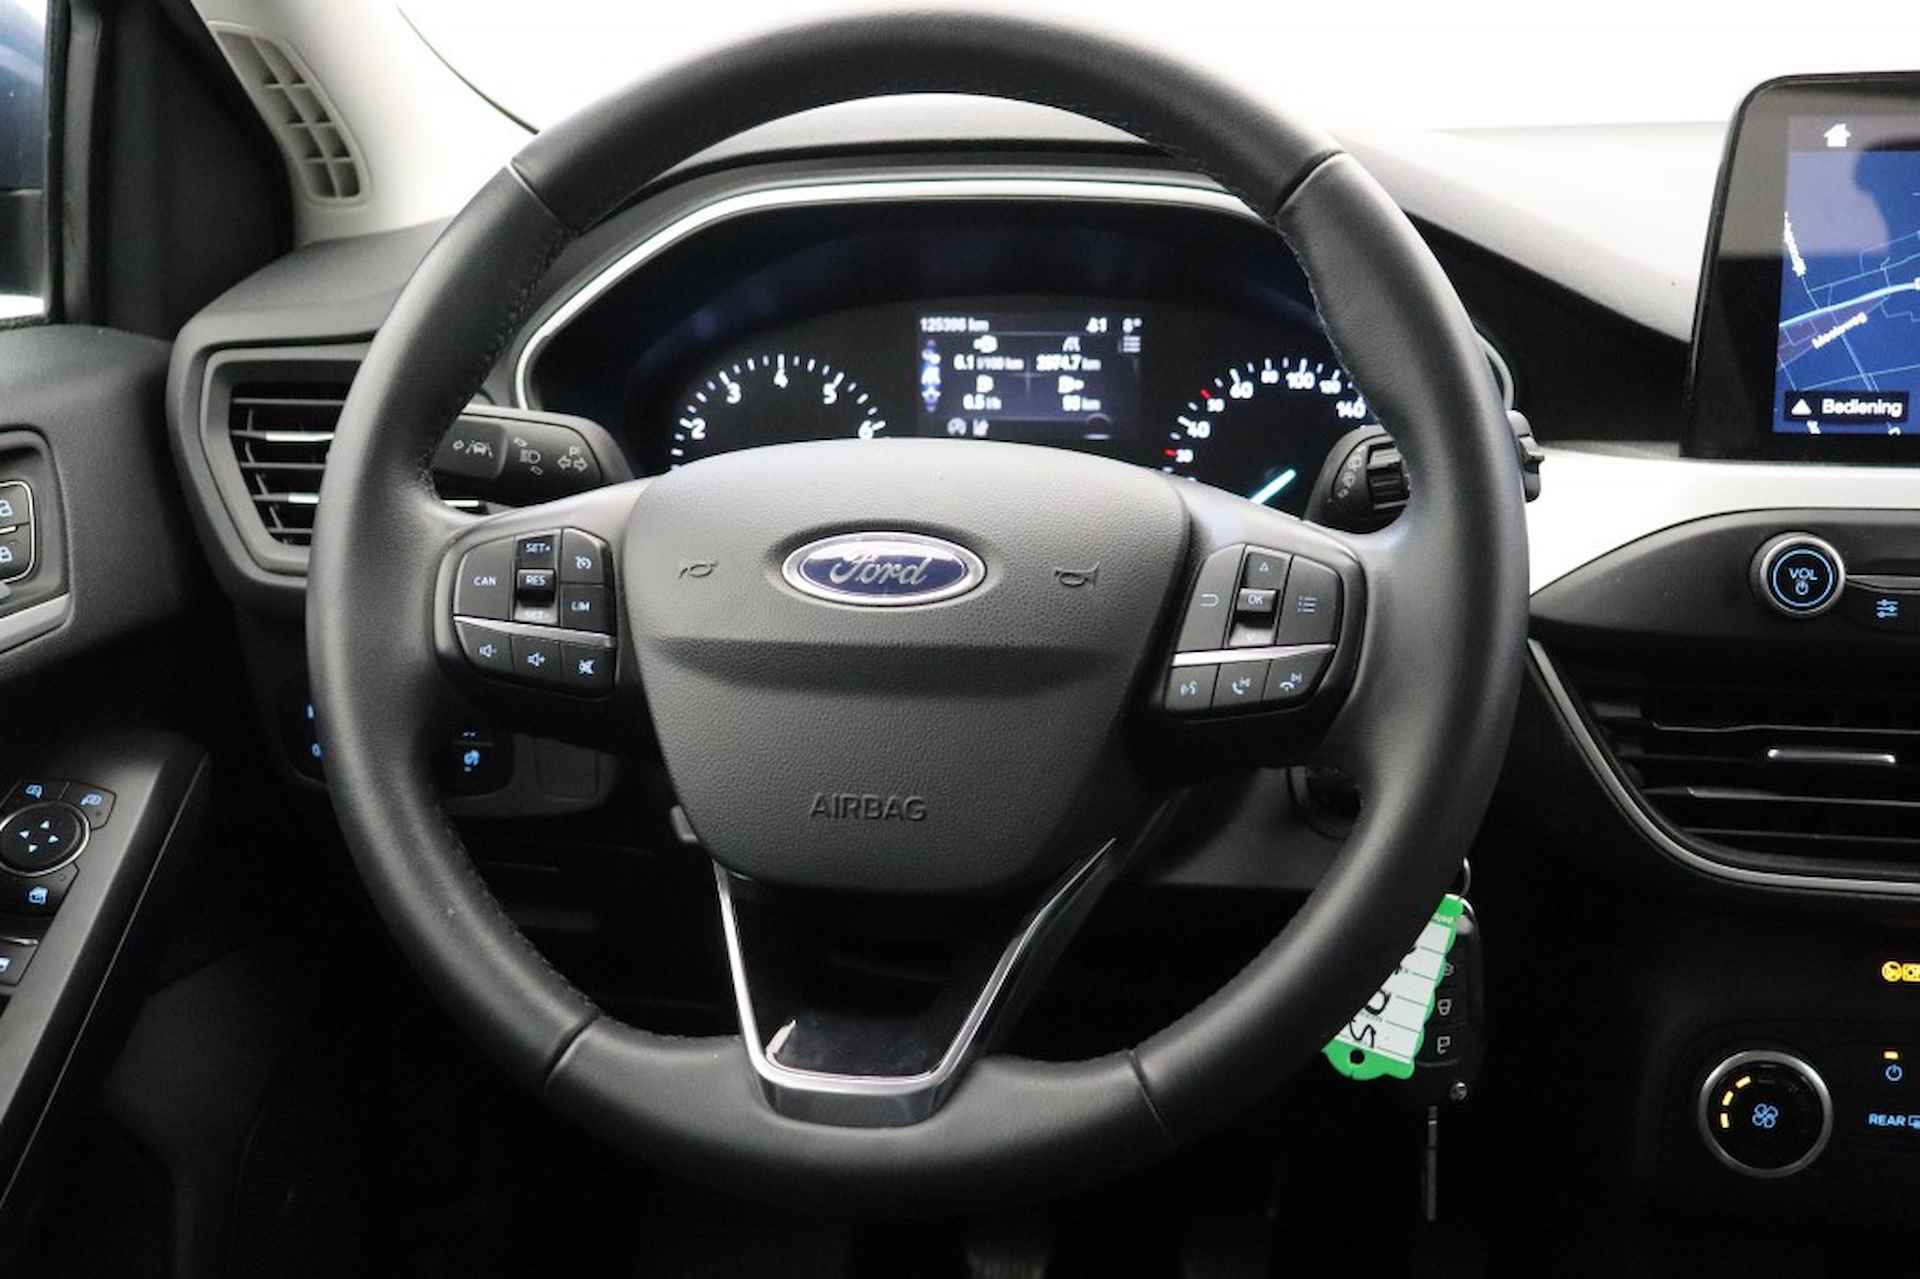 FORD Focus 1.0 EcoBoost Edition - Navi, Cruise, Airco, Model 2019 - 11/27